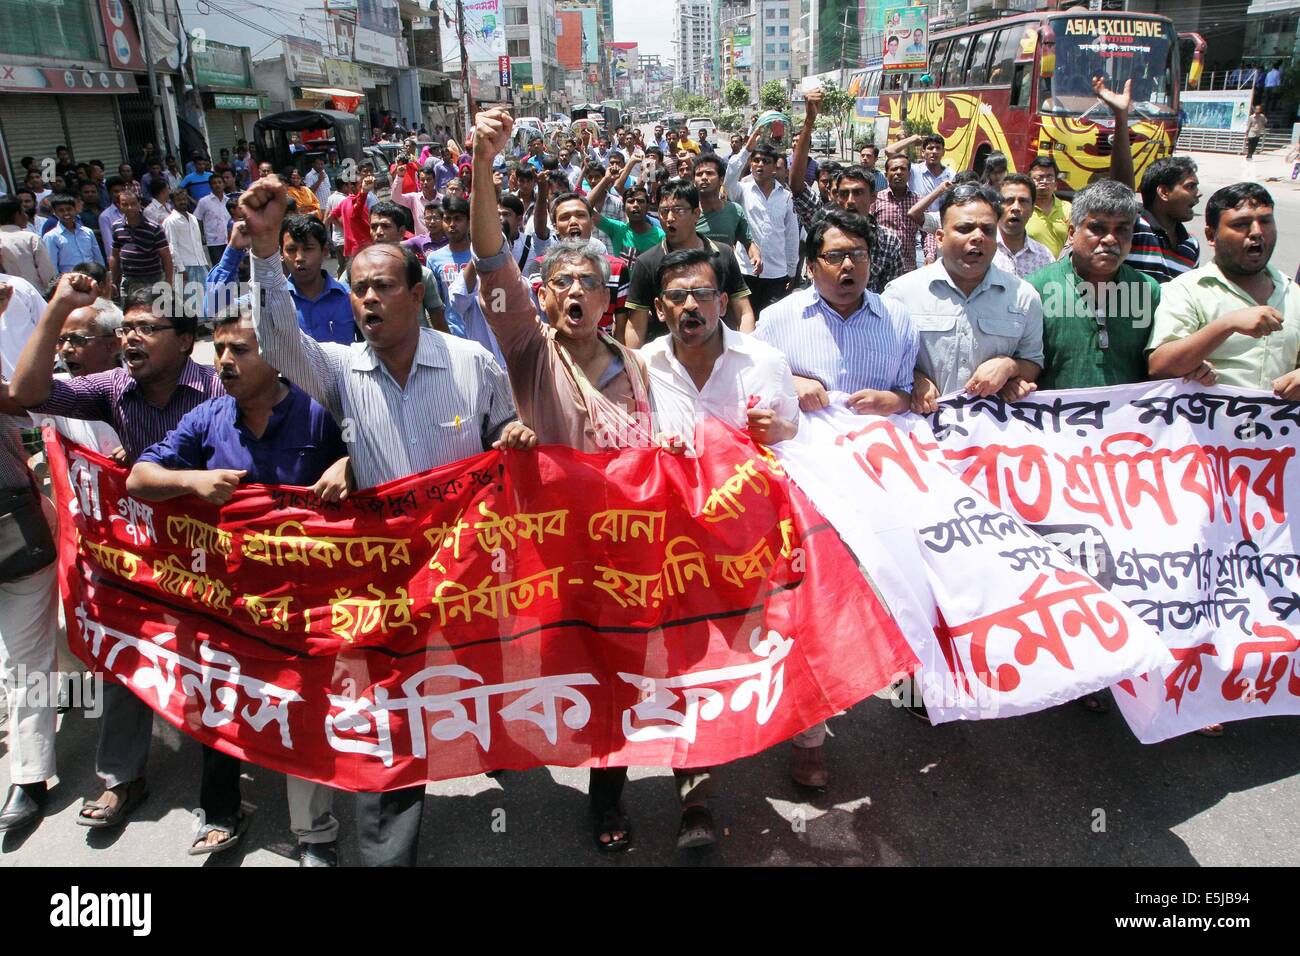 Dhaka, Bangladesh. 1st Aug, 2014. Bangladesh social activists and garment workers from the Tuba Group shout slogans during a protest against unpaid salaries, in Dhaka on August 2, 2014. Garment workers from the Tuba Group, on the sixth day of a hunger strike, are demanding three months unpaid salaries and Eid bonus. Stock Photo